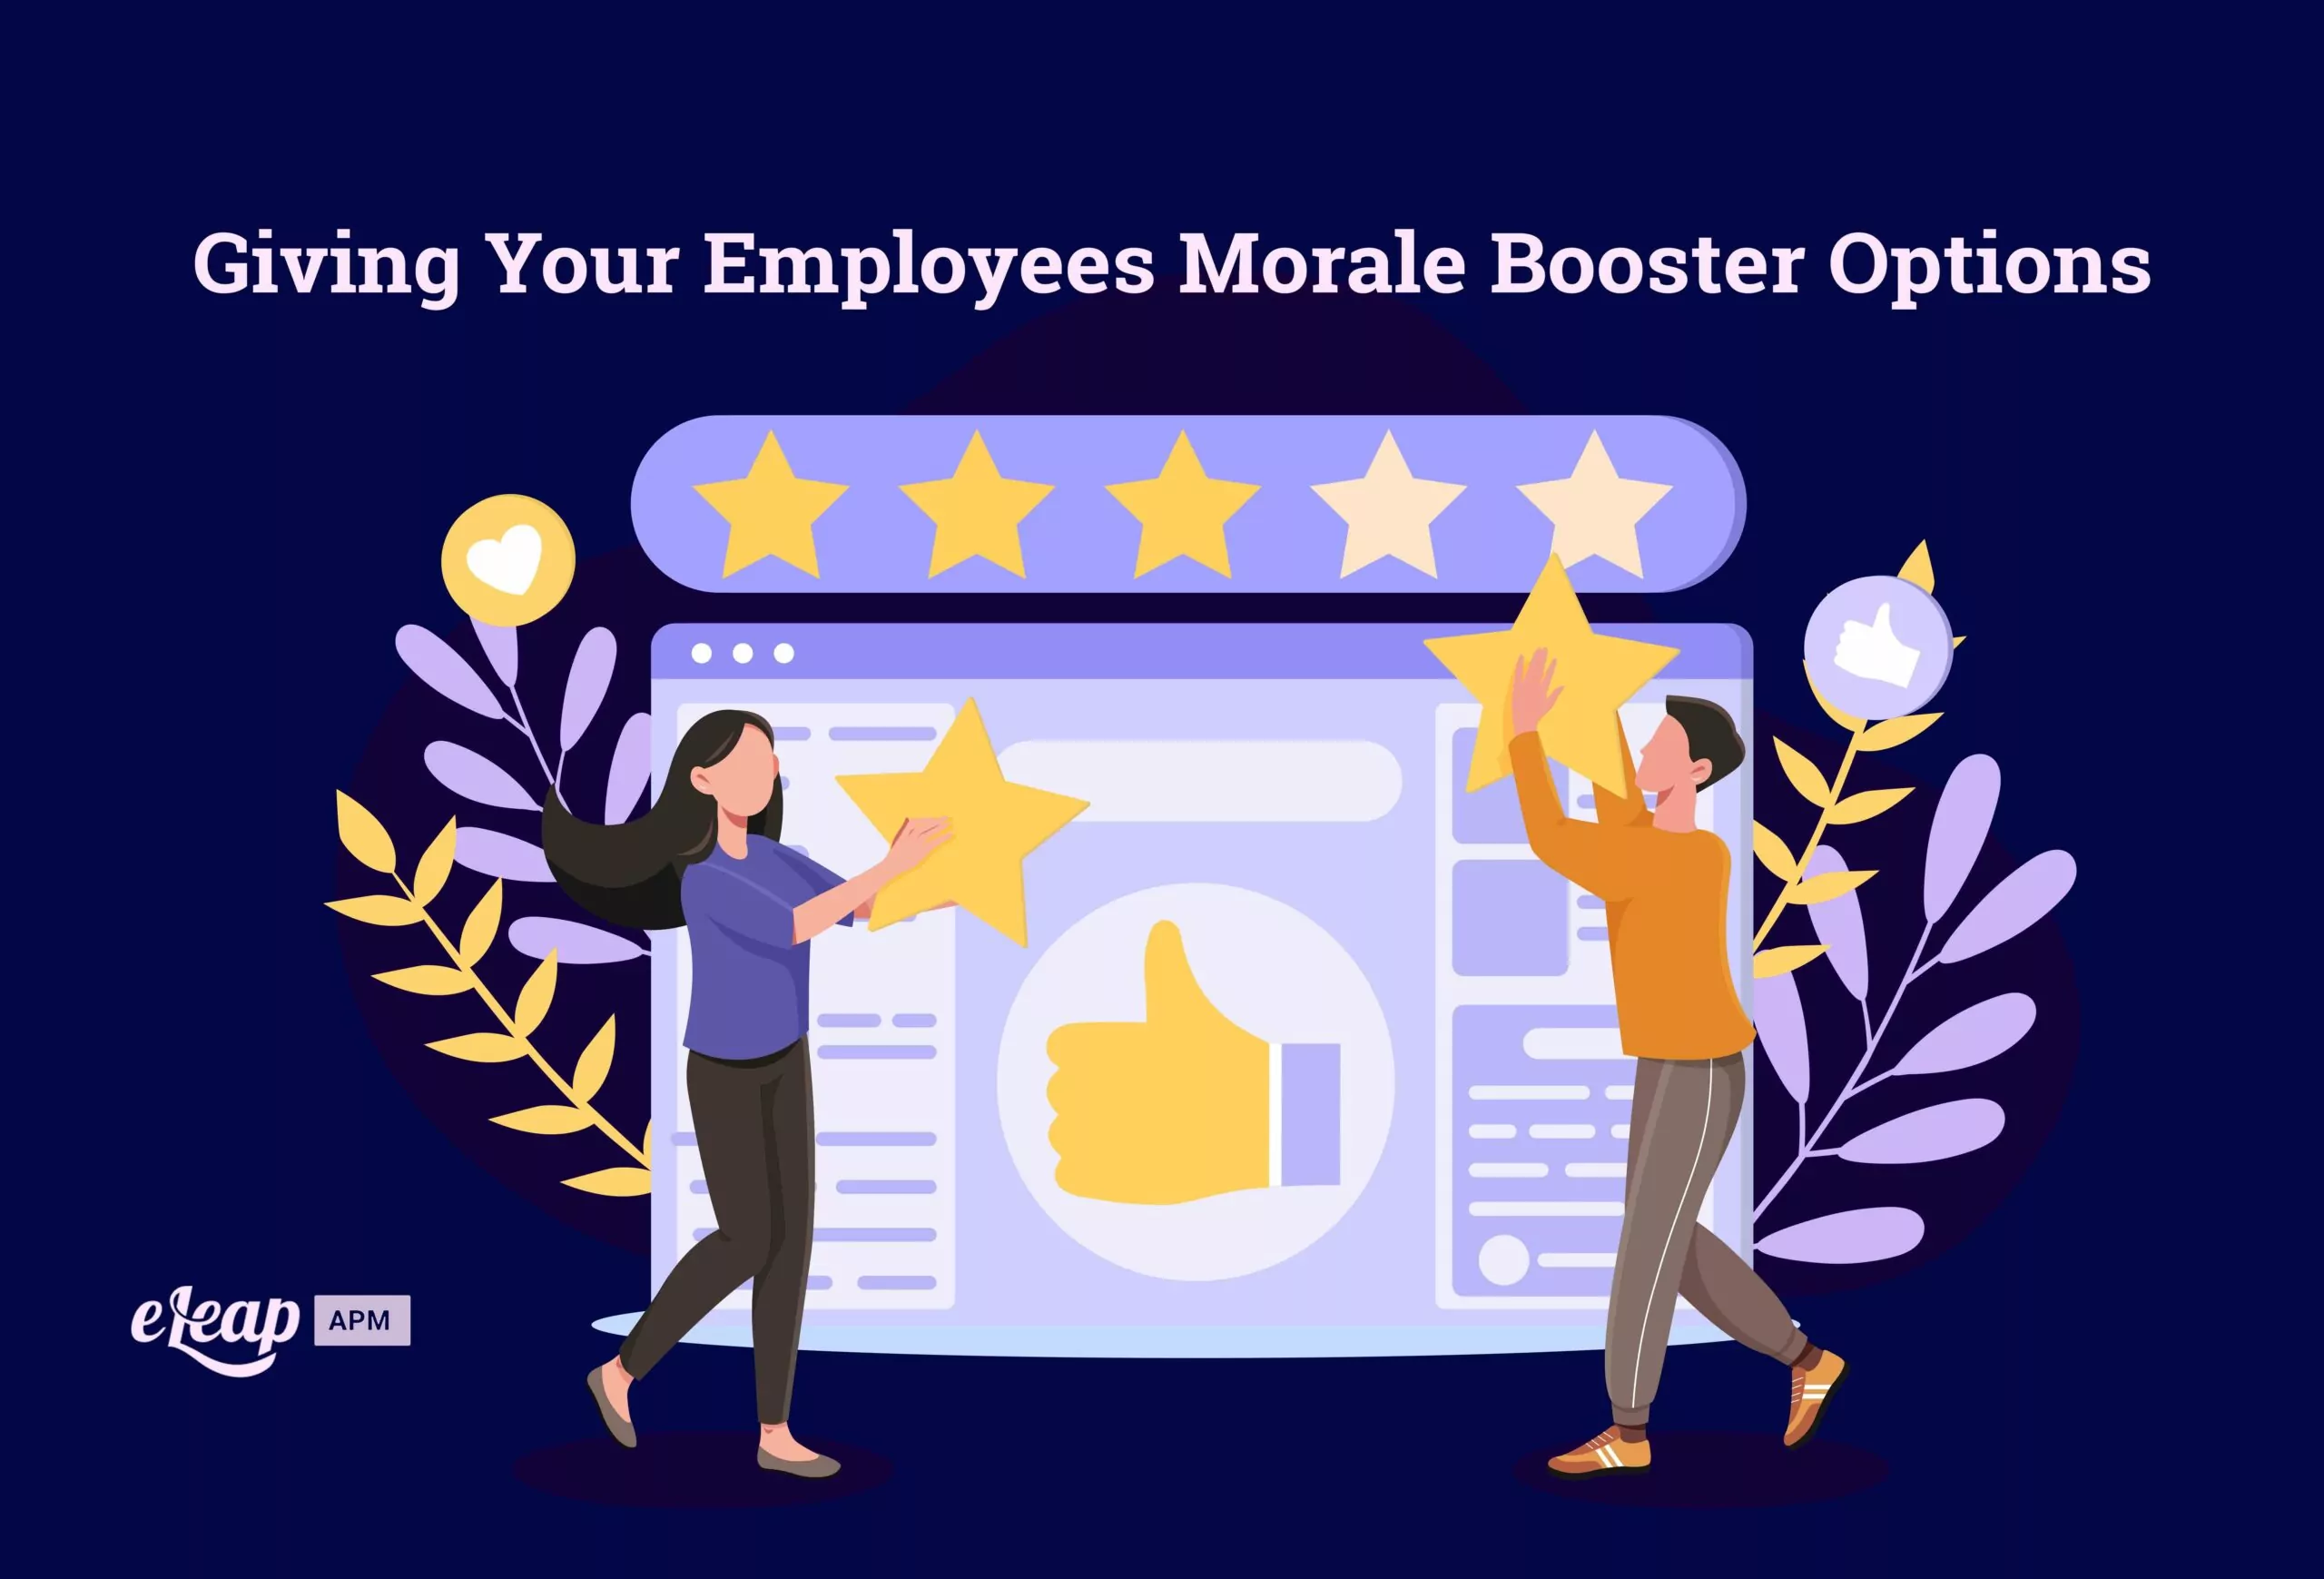 Giving Your Employees Morale Booster Options